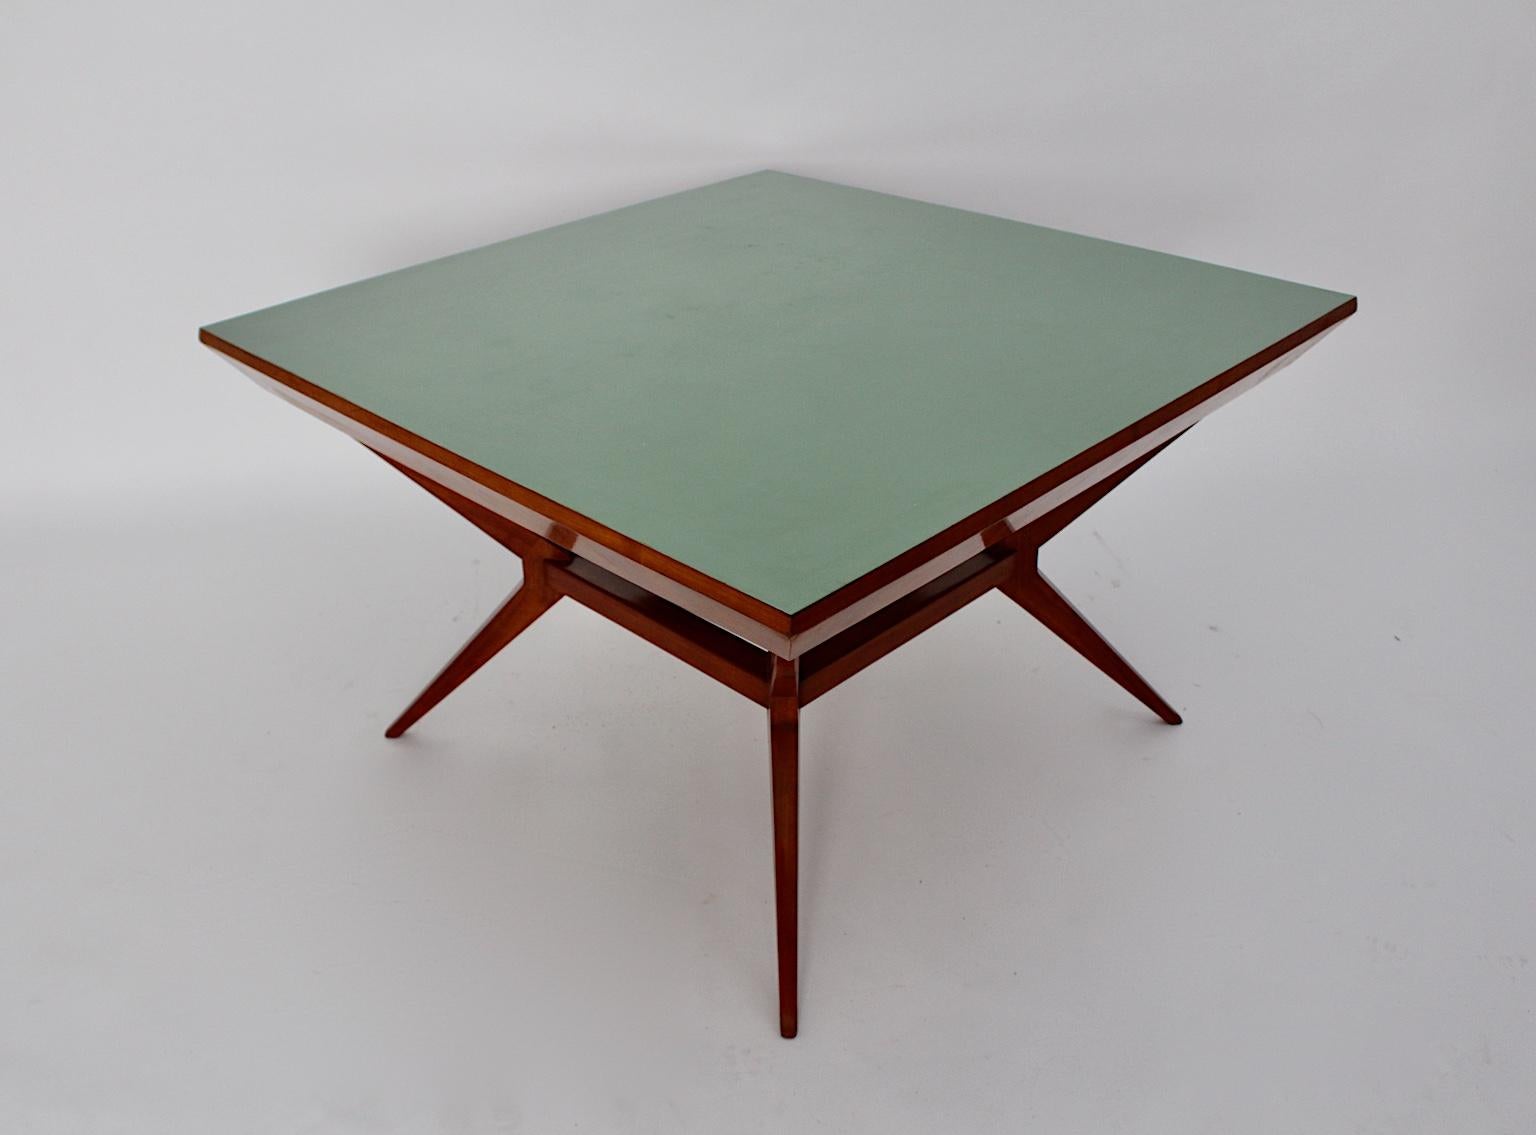 Mid-20th Century Mid-Century Modern Vintage Cherry Teal Dining Table Franz Schuster Vienna 1950s For Sale